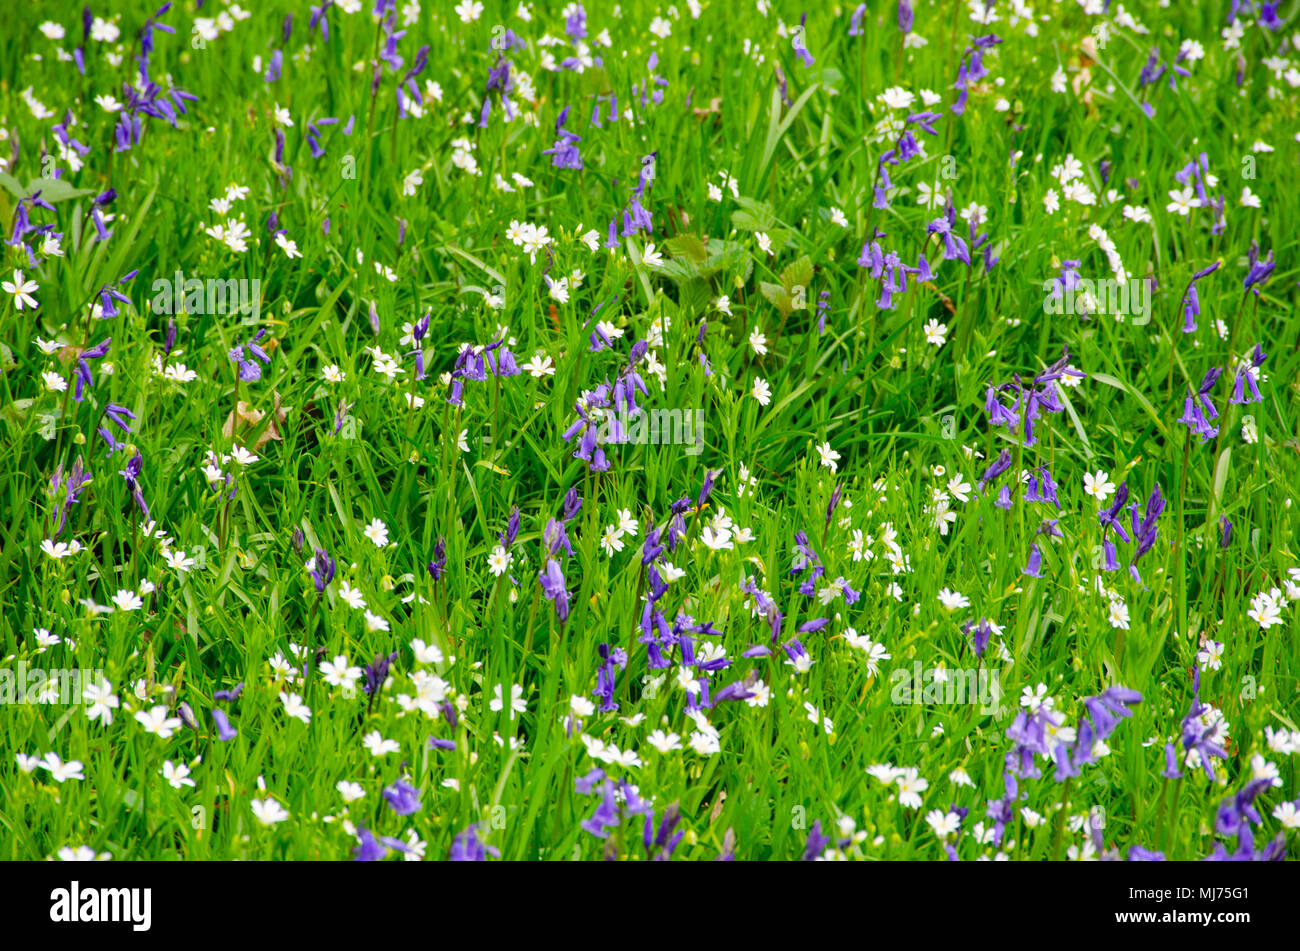 nature, blue, spring, green, landscape, england, beauty, flower, bluebell, wild, tree, scenic, natural, outdoors, woodland, purple, wildflower, color Stock Photo